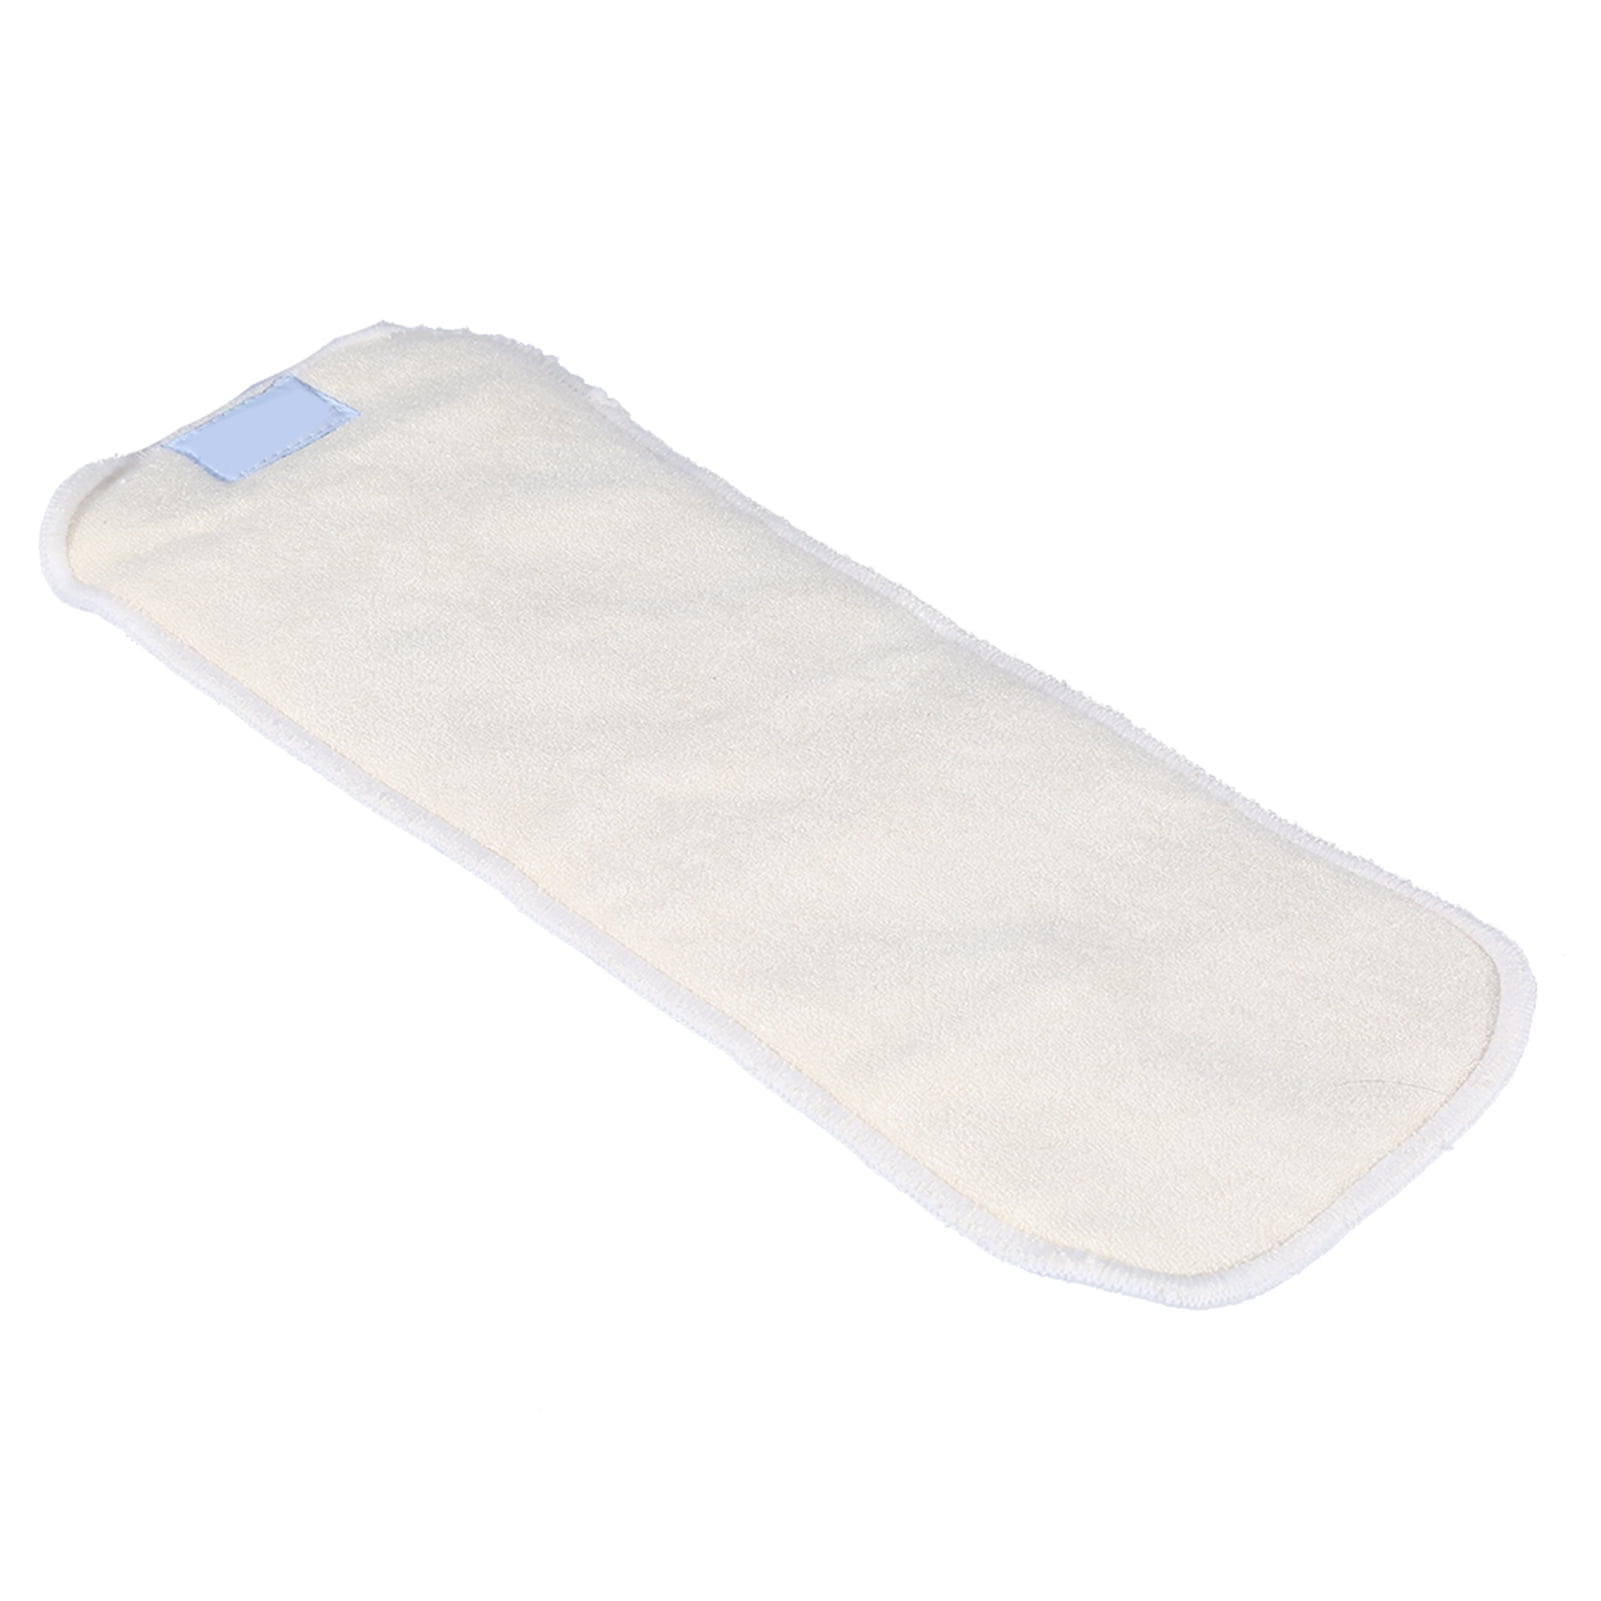 Incontinence Bed Pads, Heavy Absorbency Underpads, Reusable Washable 4 ...